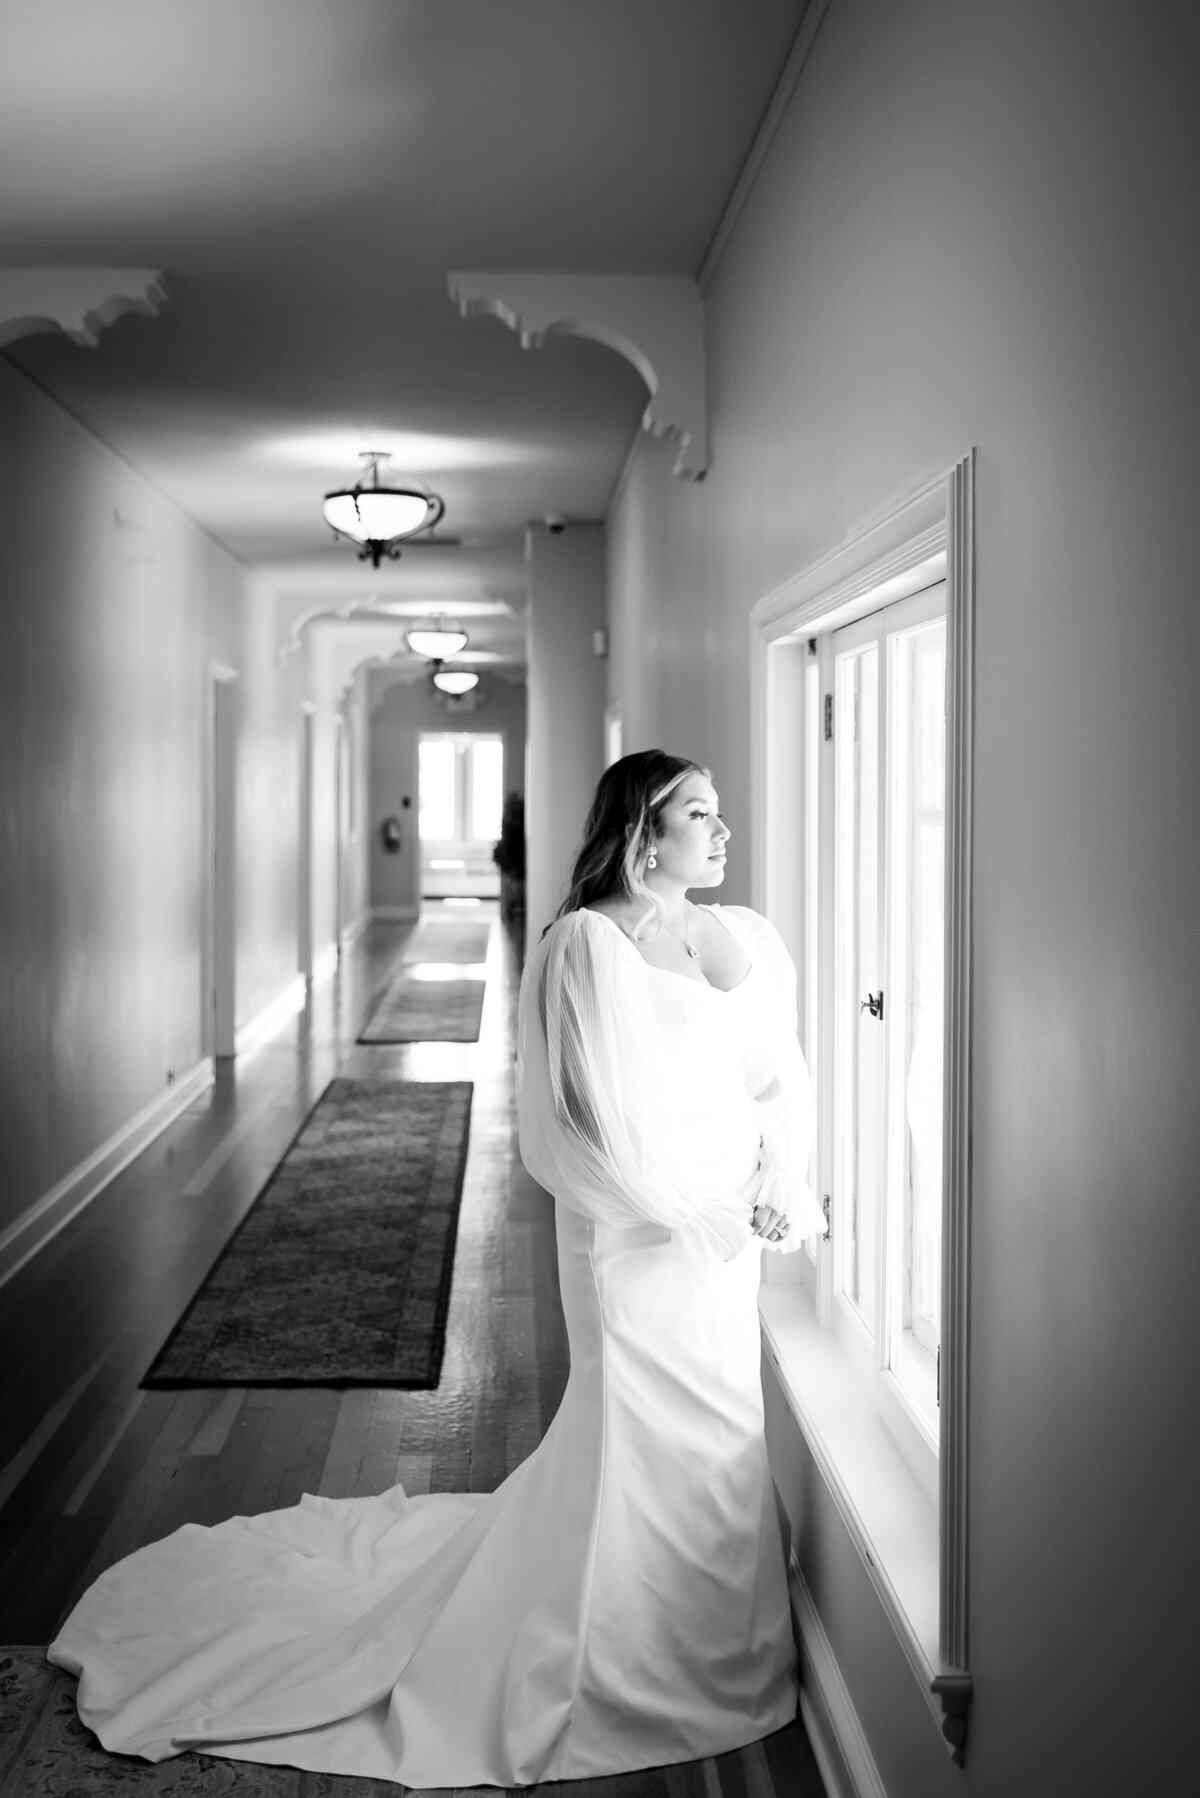 An elegant bride stares out the window on her wedding day.